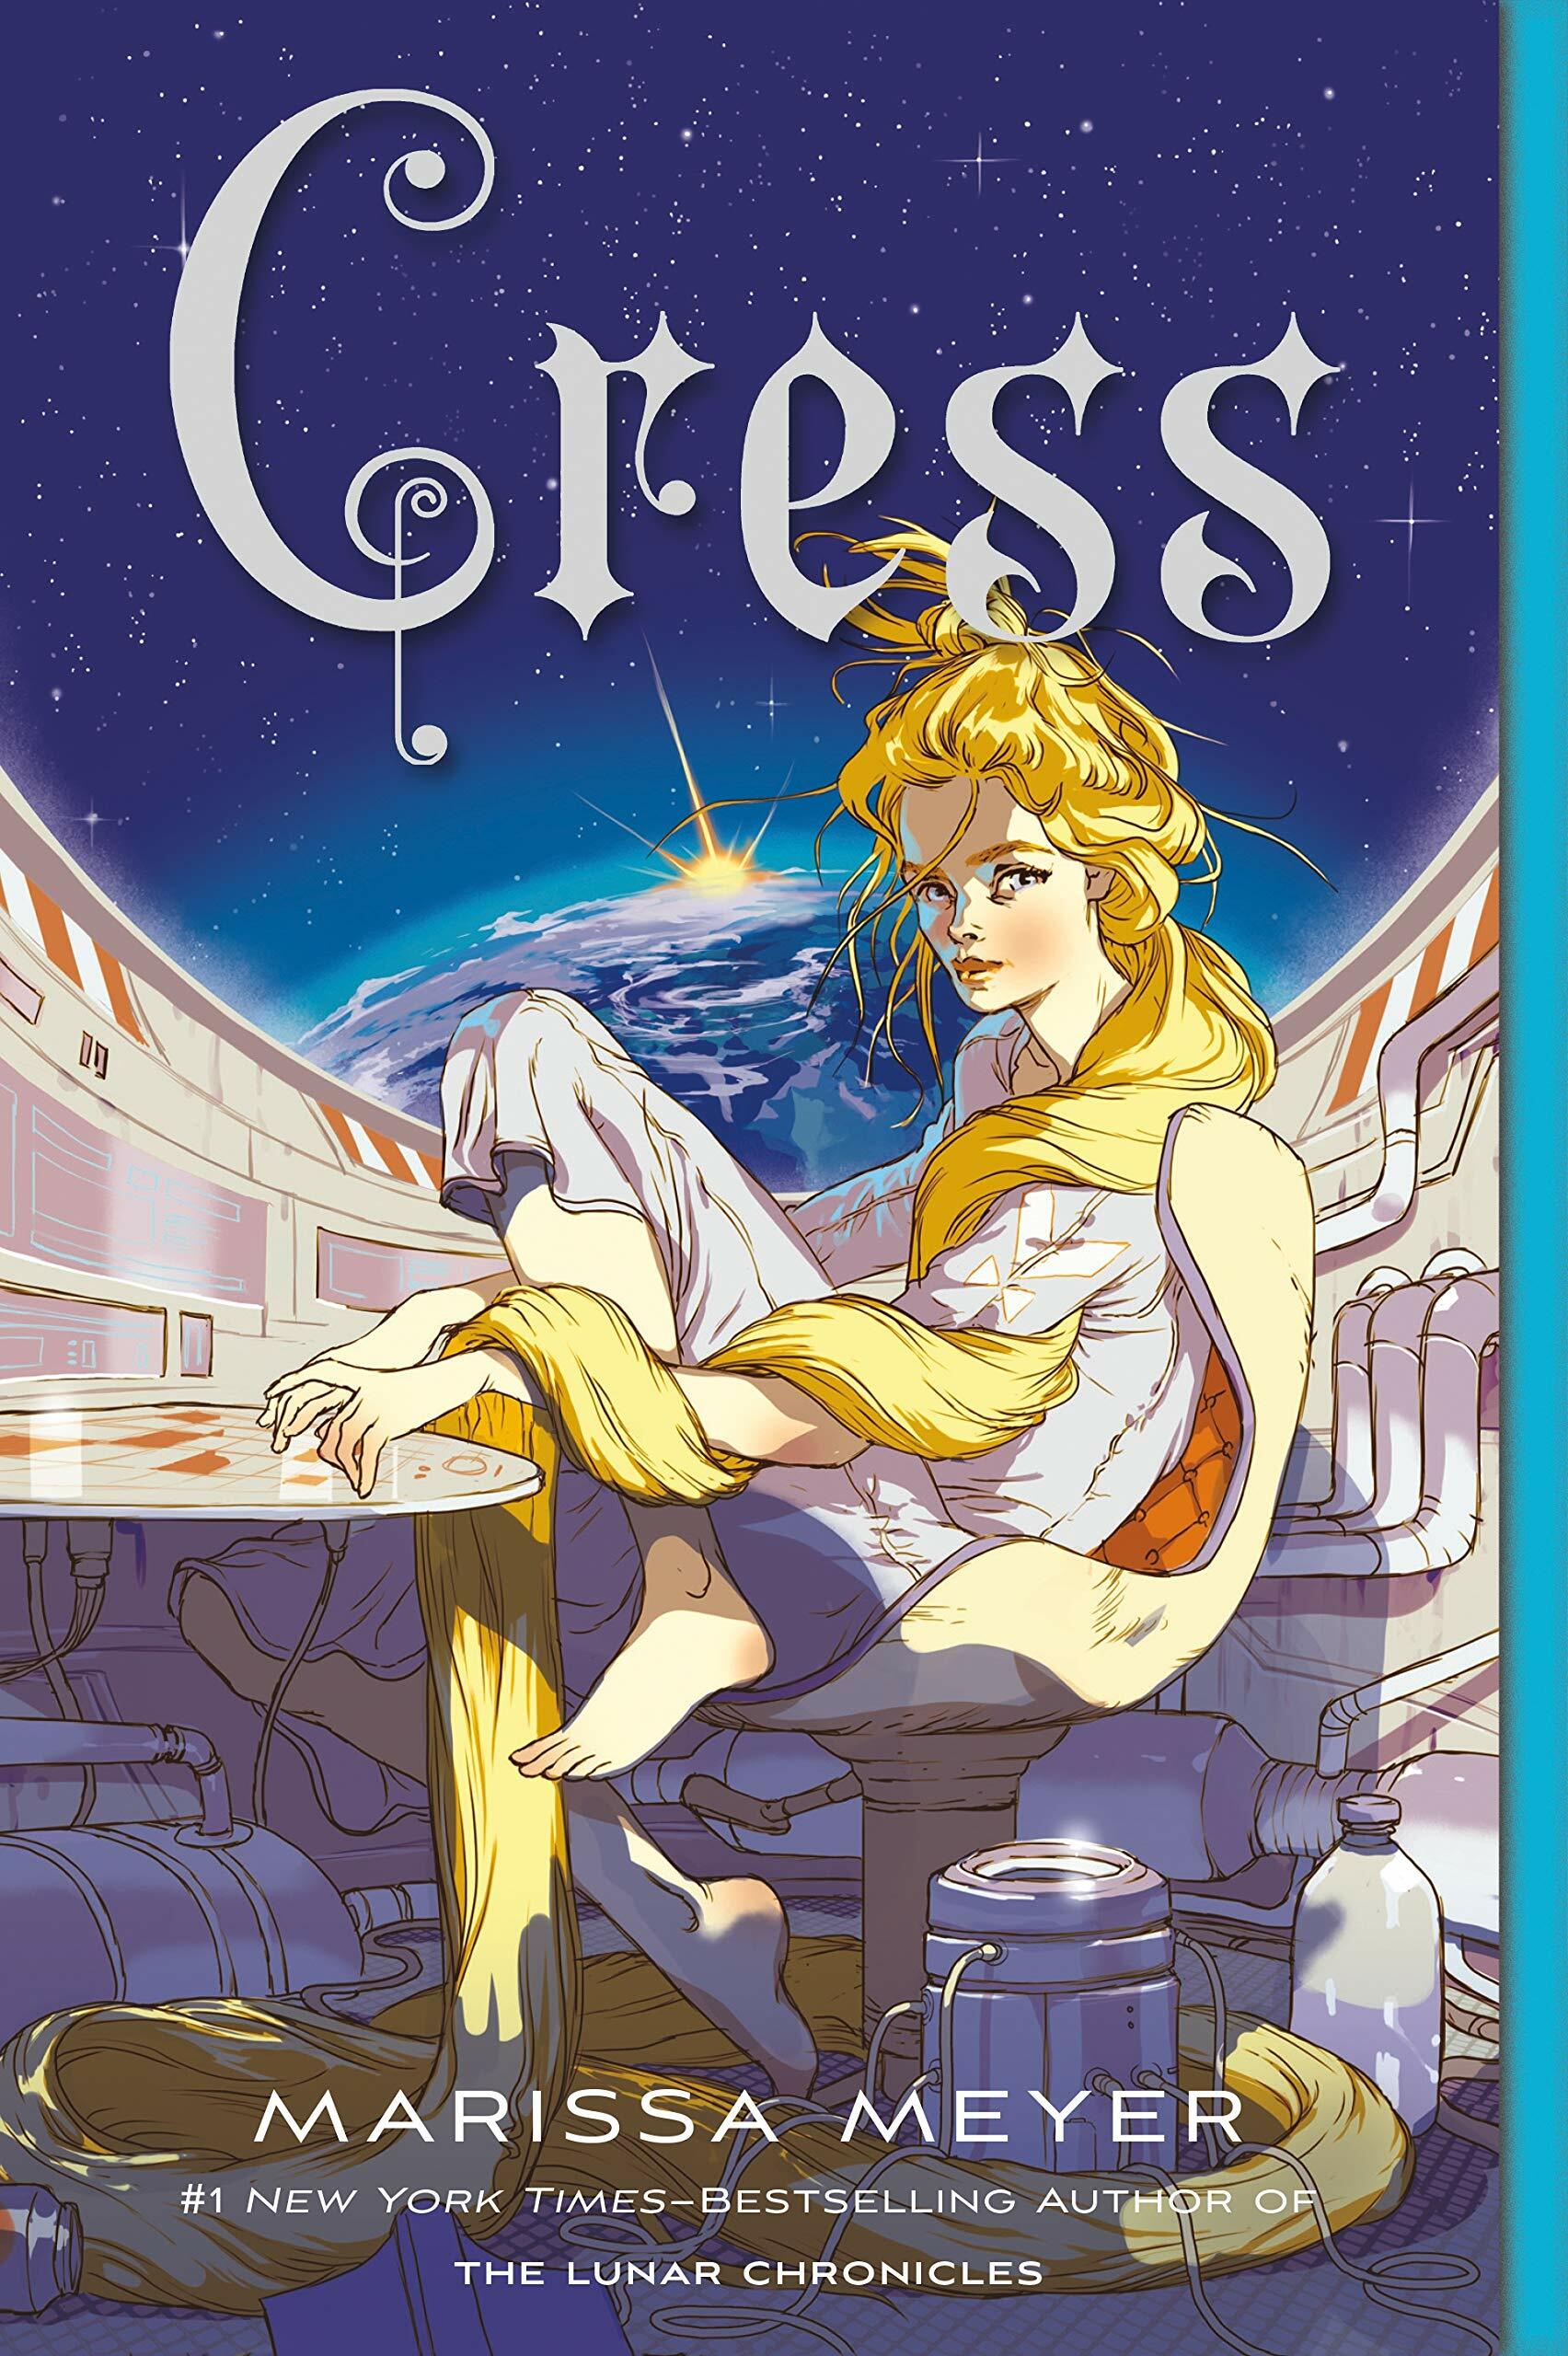 Cress: the Lunar Chronicles #3 (Paperback)